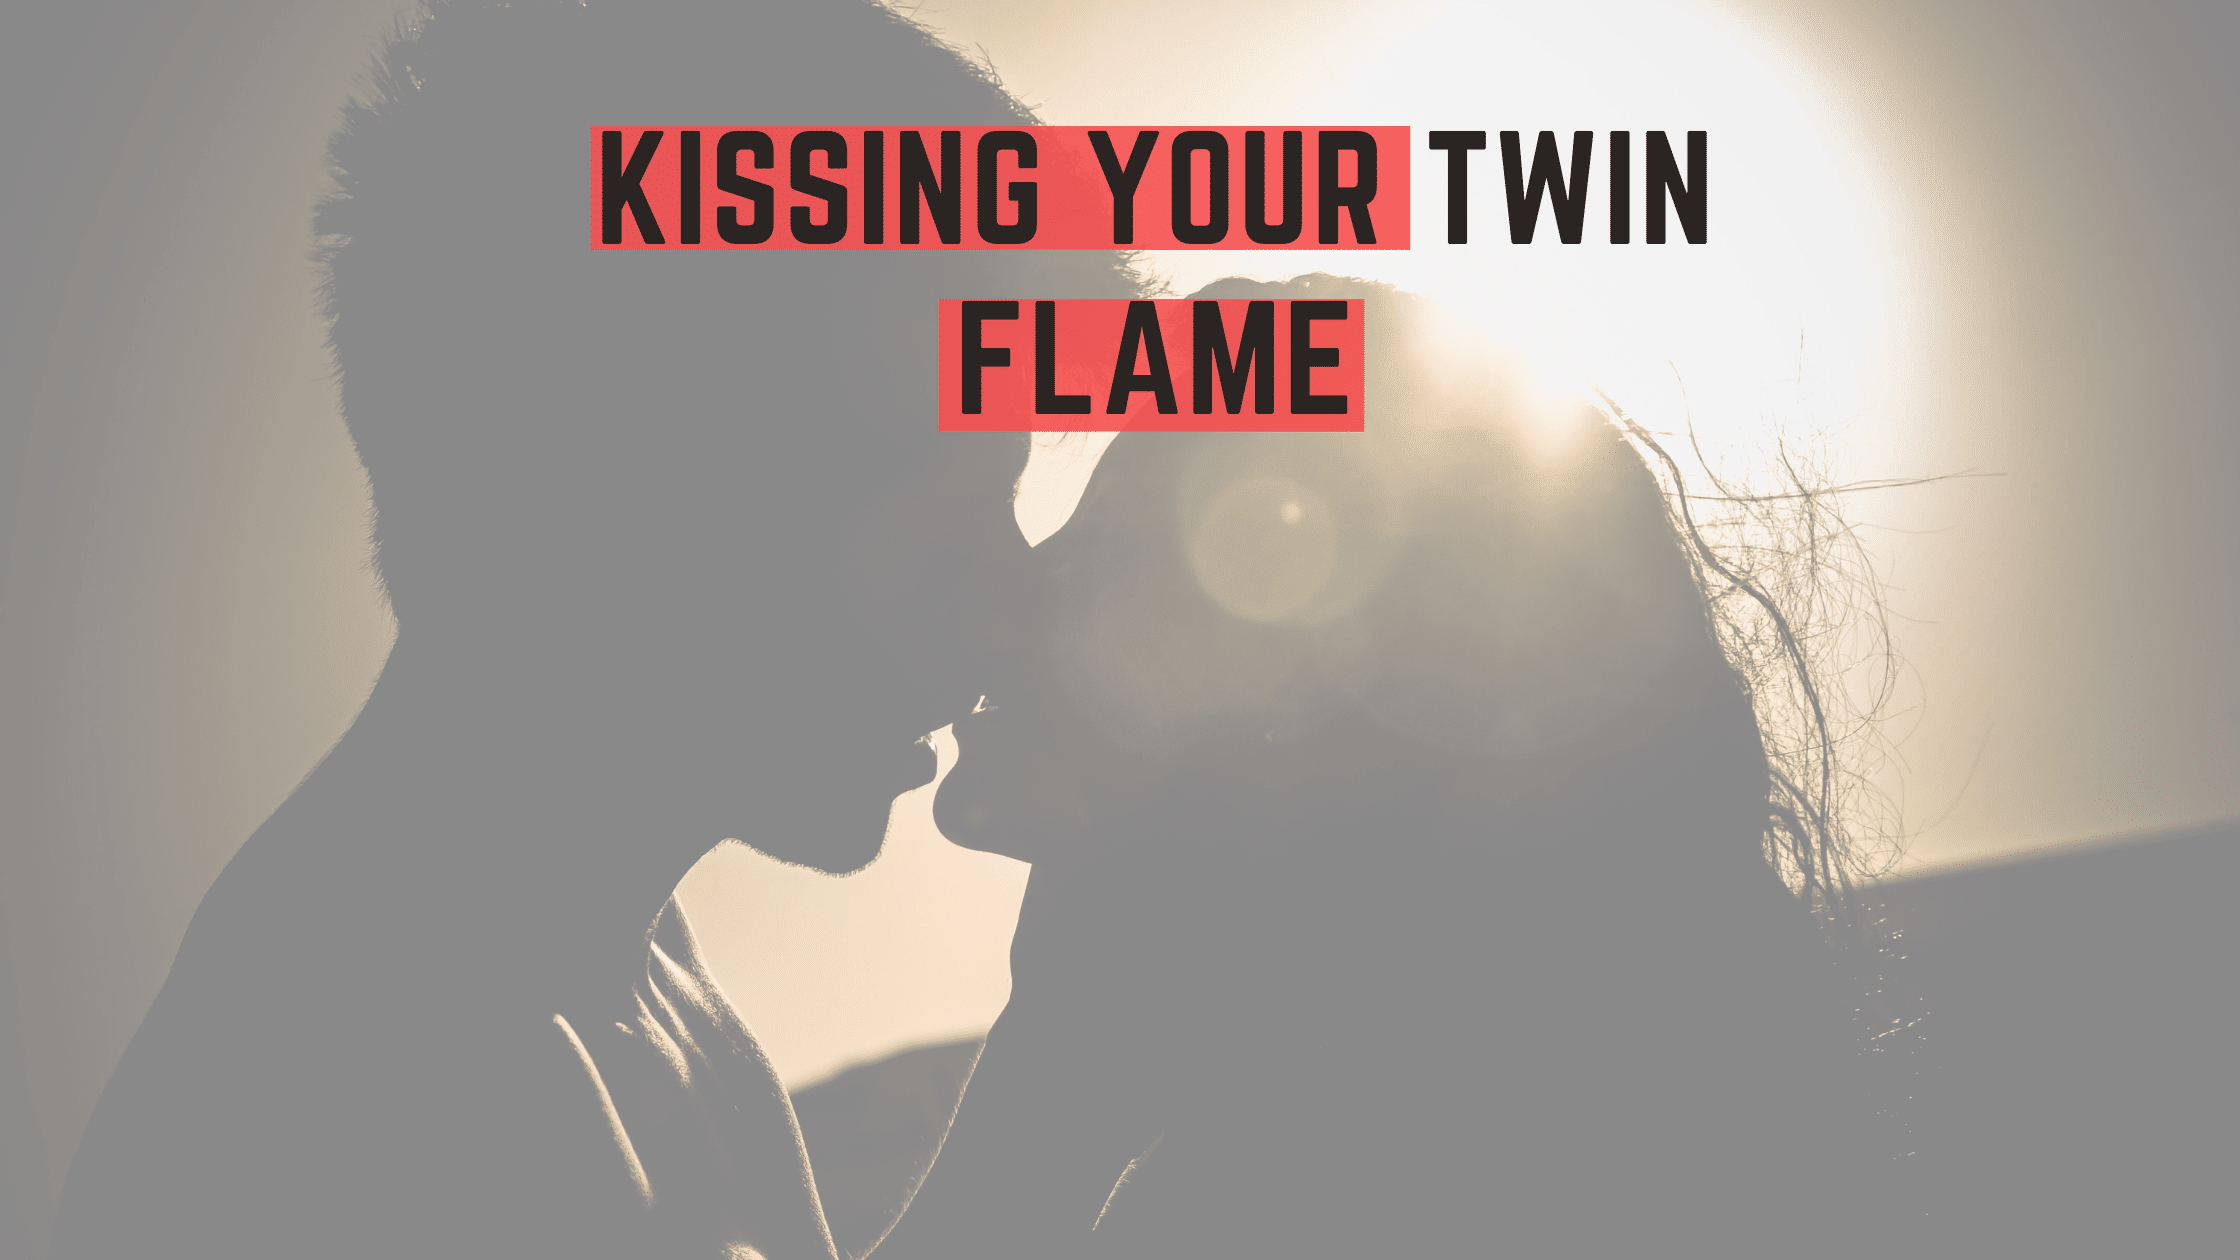 Kissing your twin flame